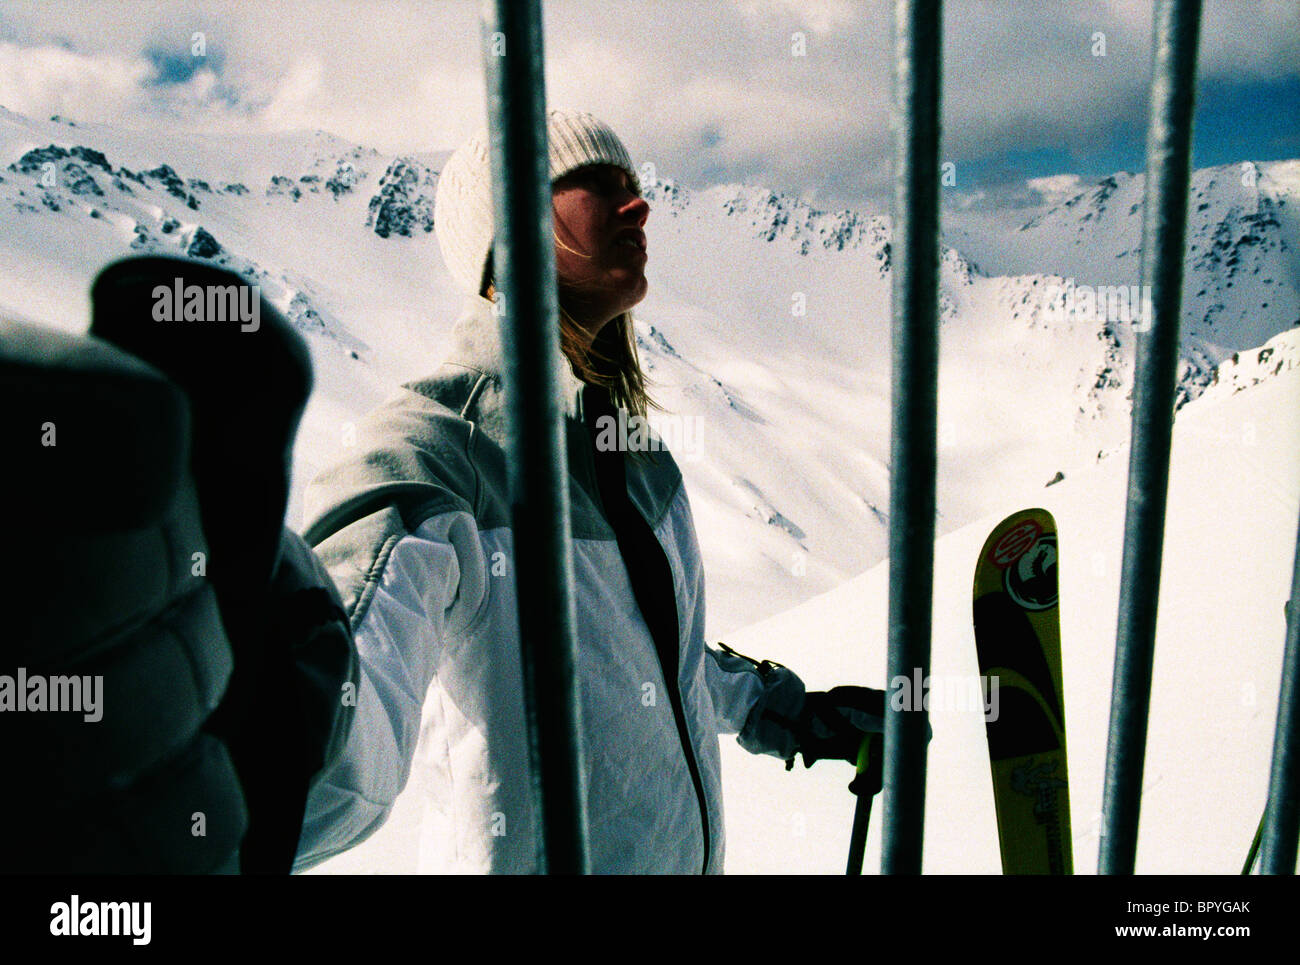 A woman stands behind a fence at a ski resort. Stock Photo